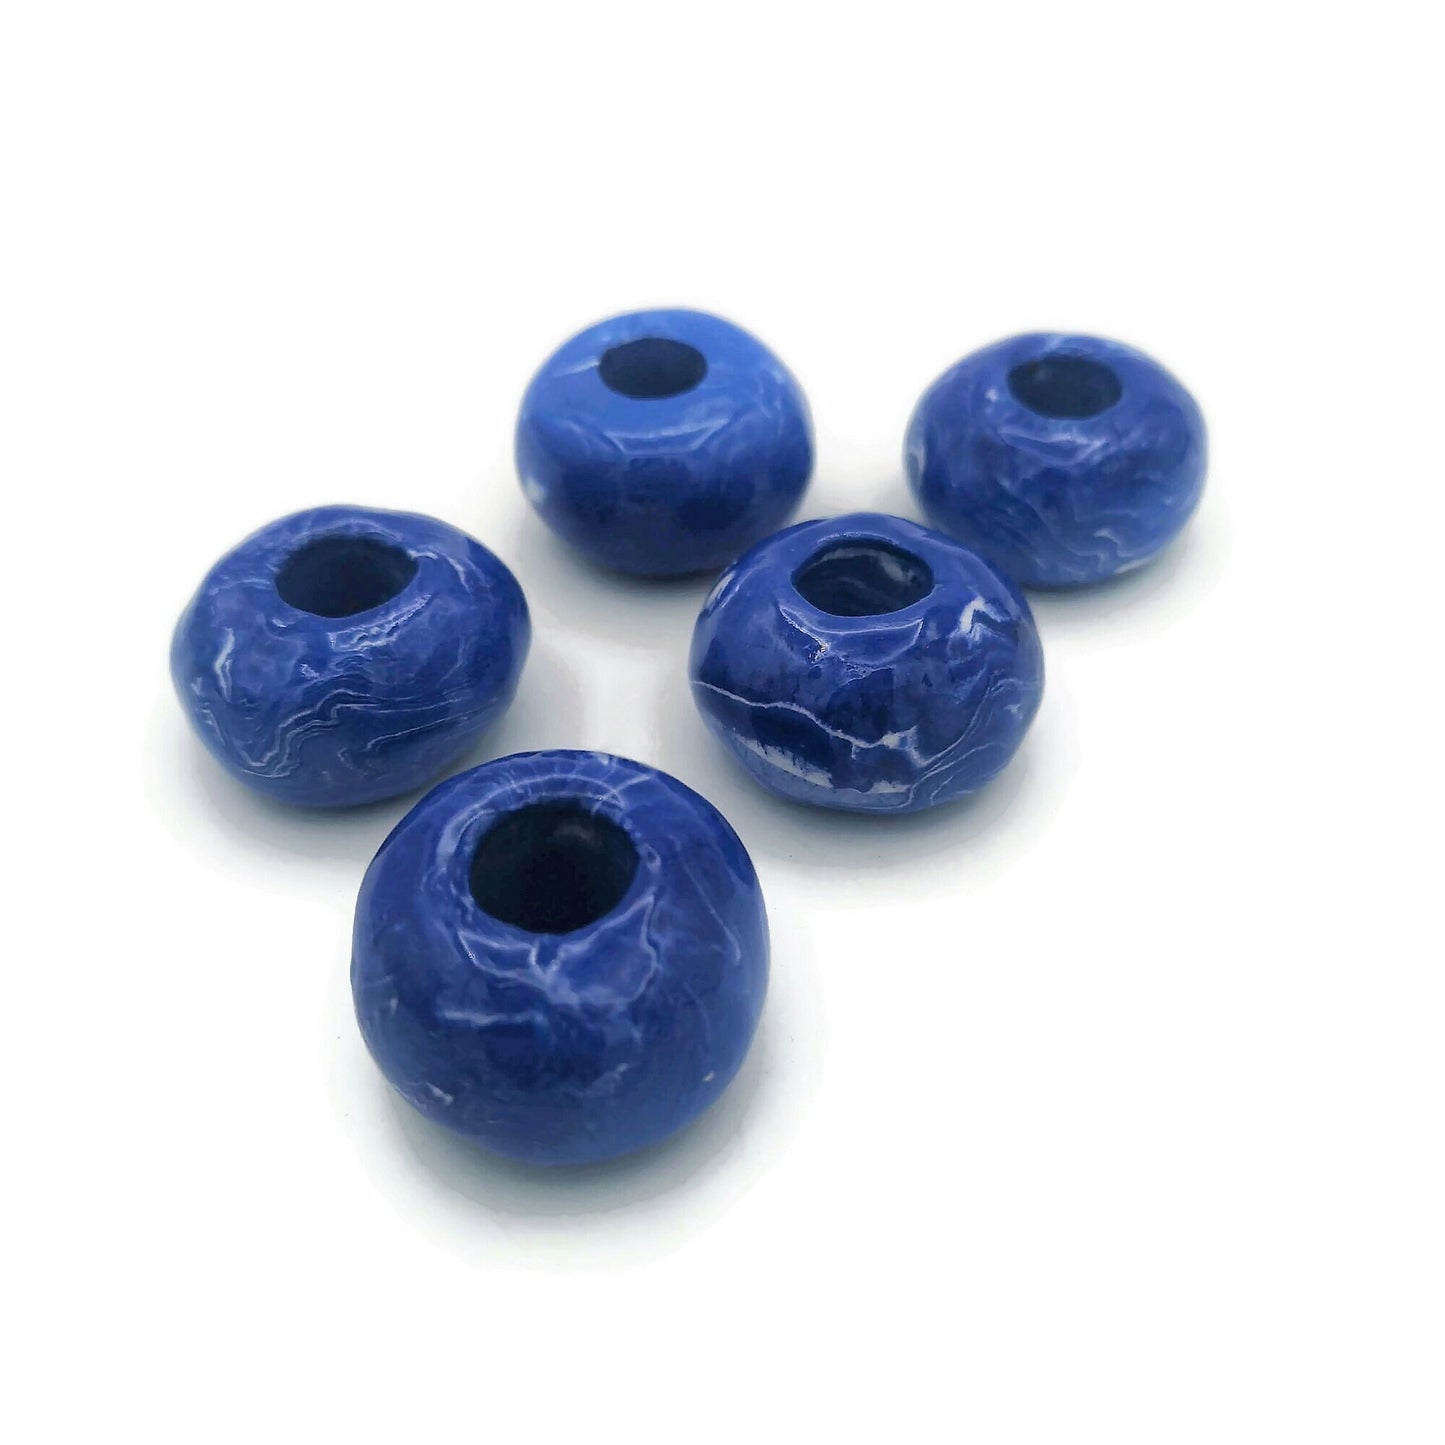 5Pc Large Ceramic Beads For Macrame and Statement Jewelry Making, Marbled White and Blue Clay Beads With Large Holes - Ceramica Ana Rafael